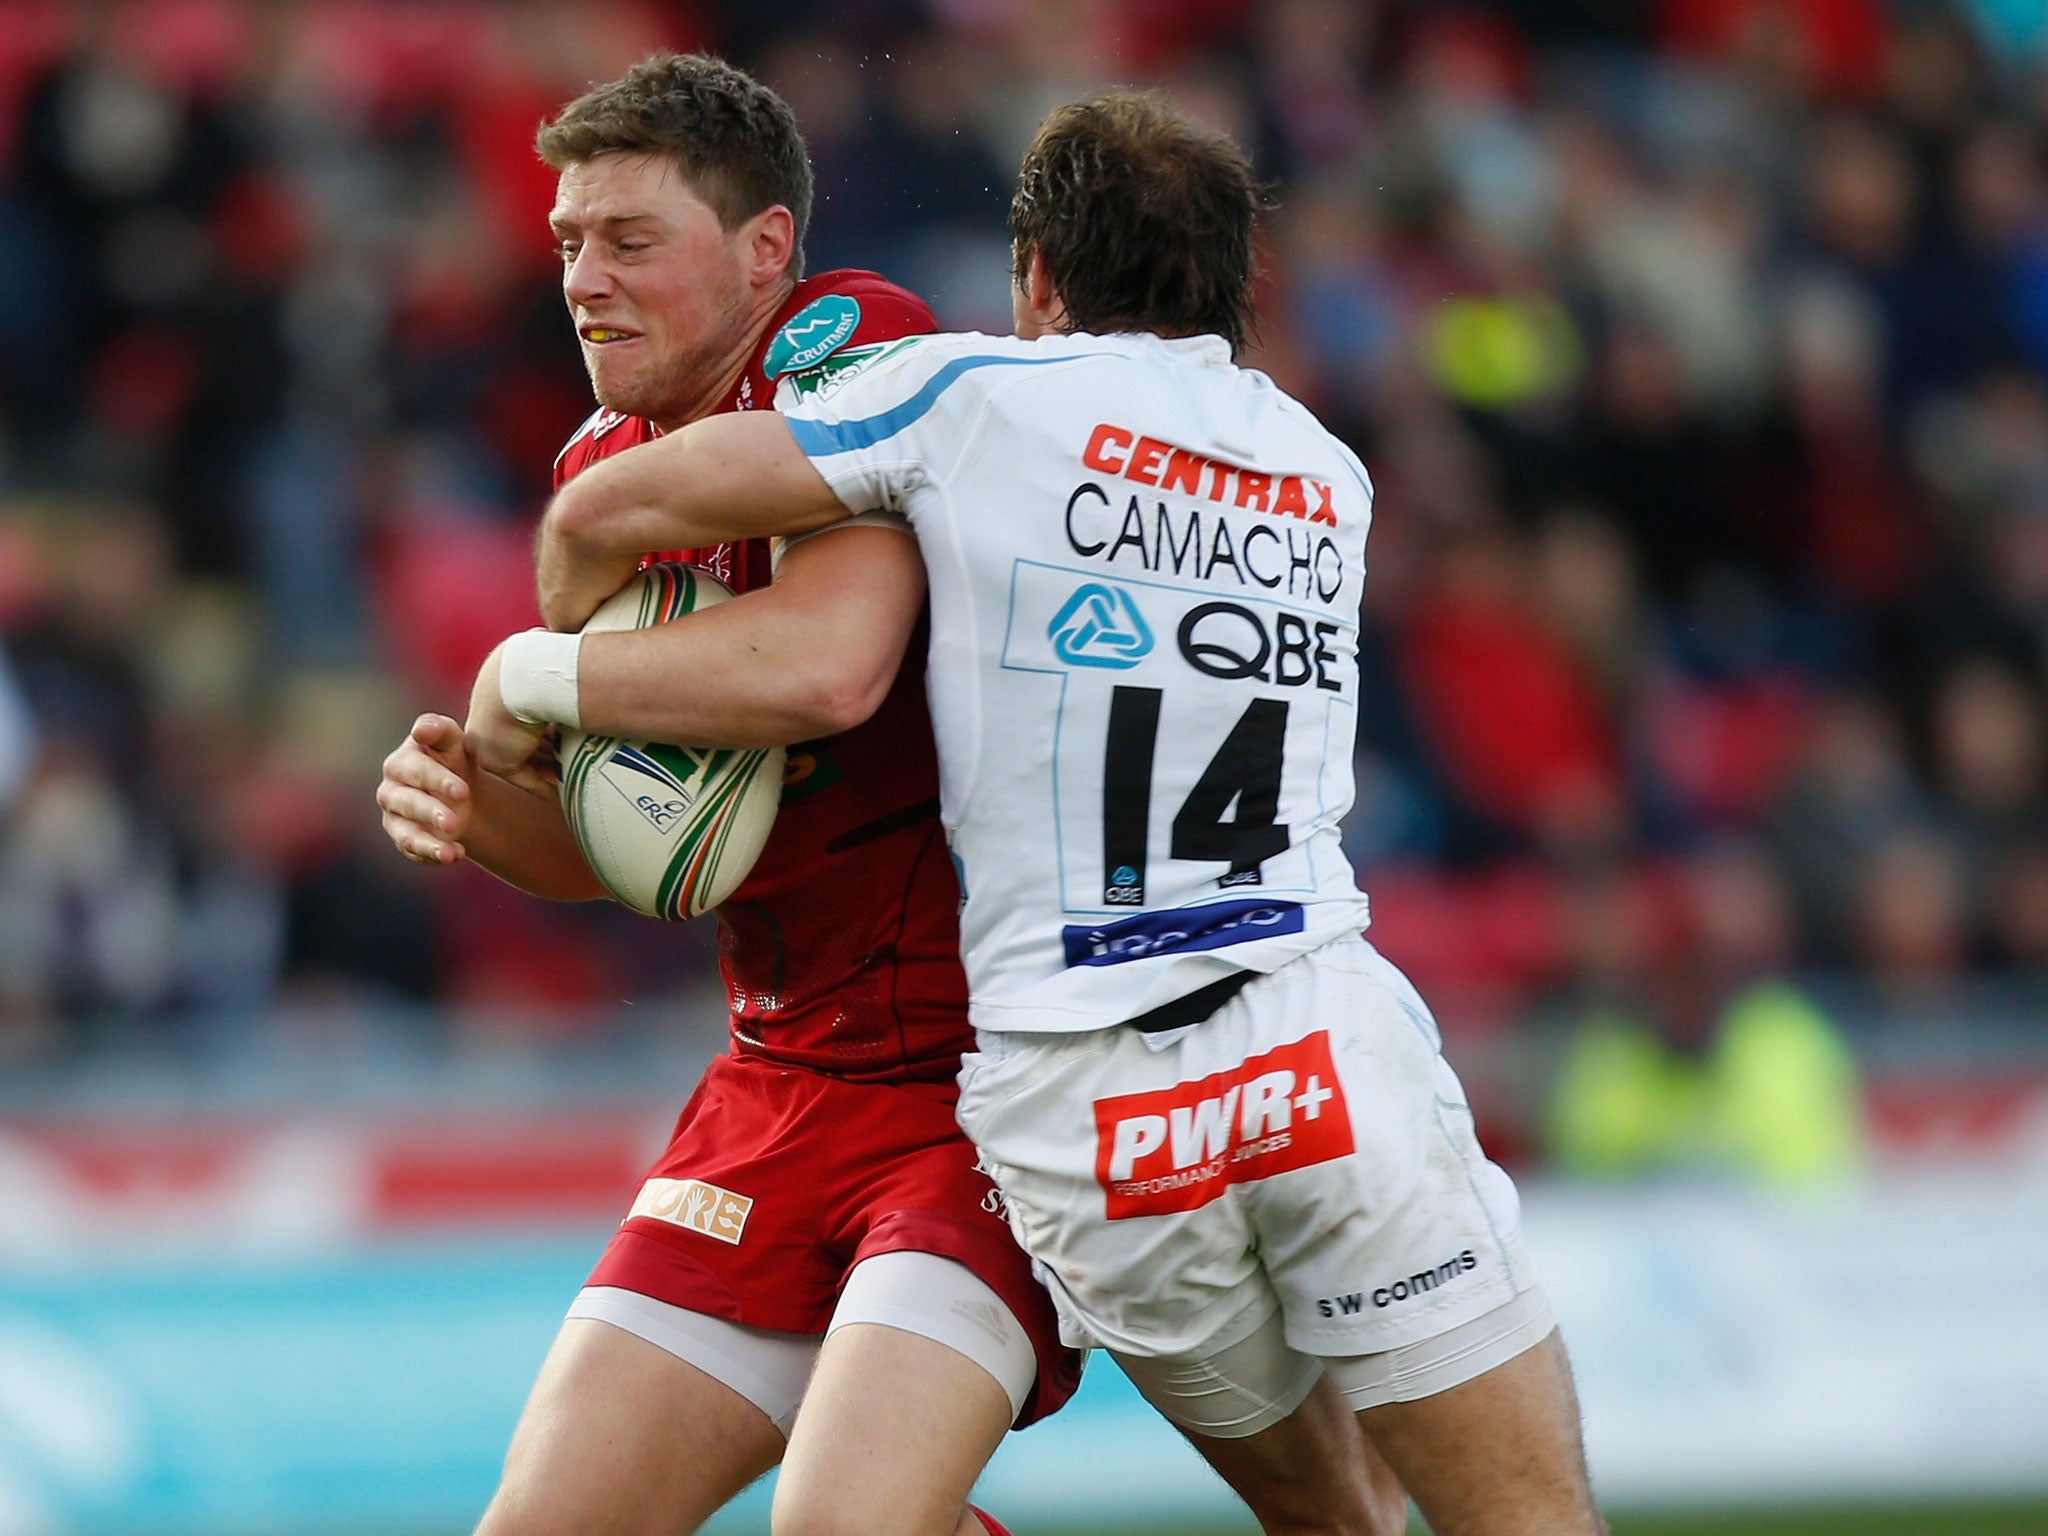 Rhys Priestland (on left in picture) was carried off on a stretcher early in the second half after slipping as he ran into contact